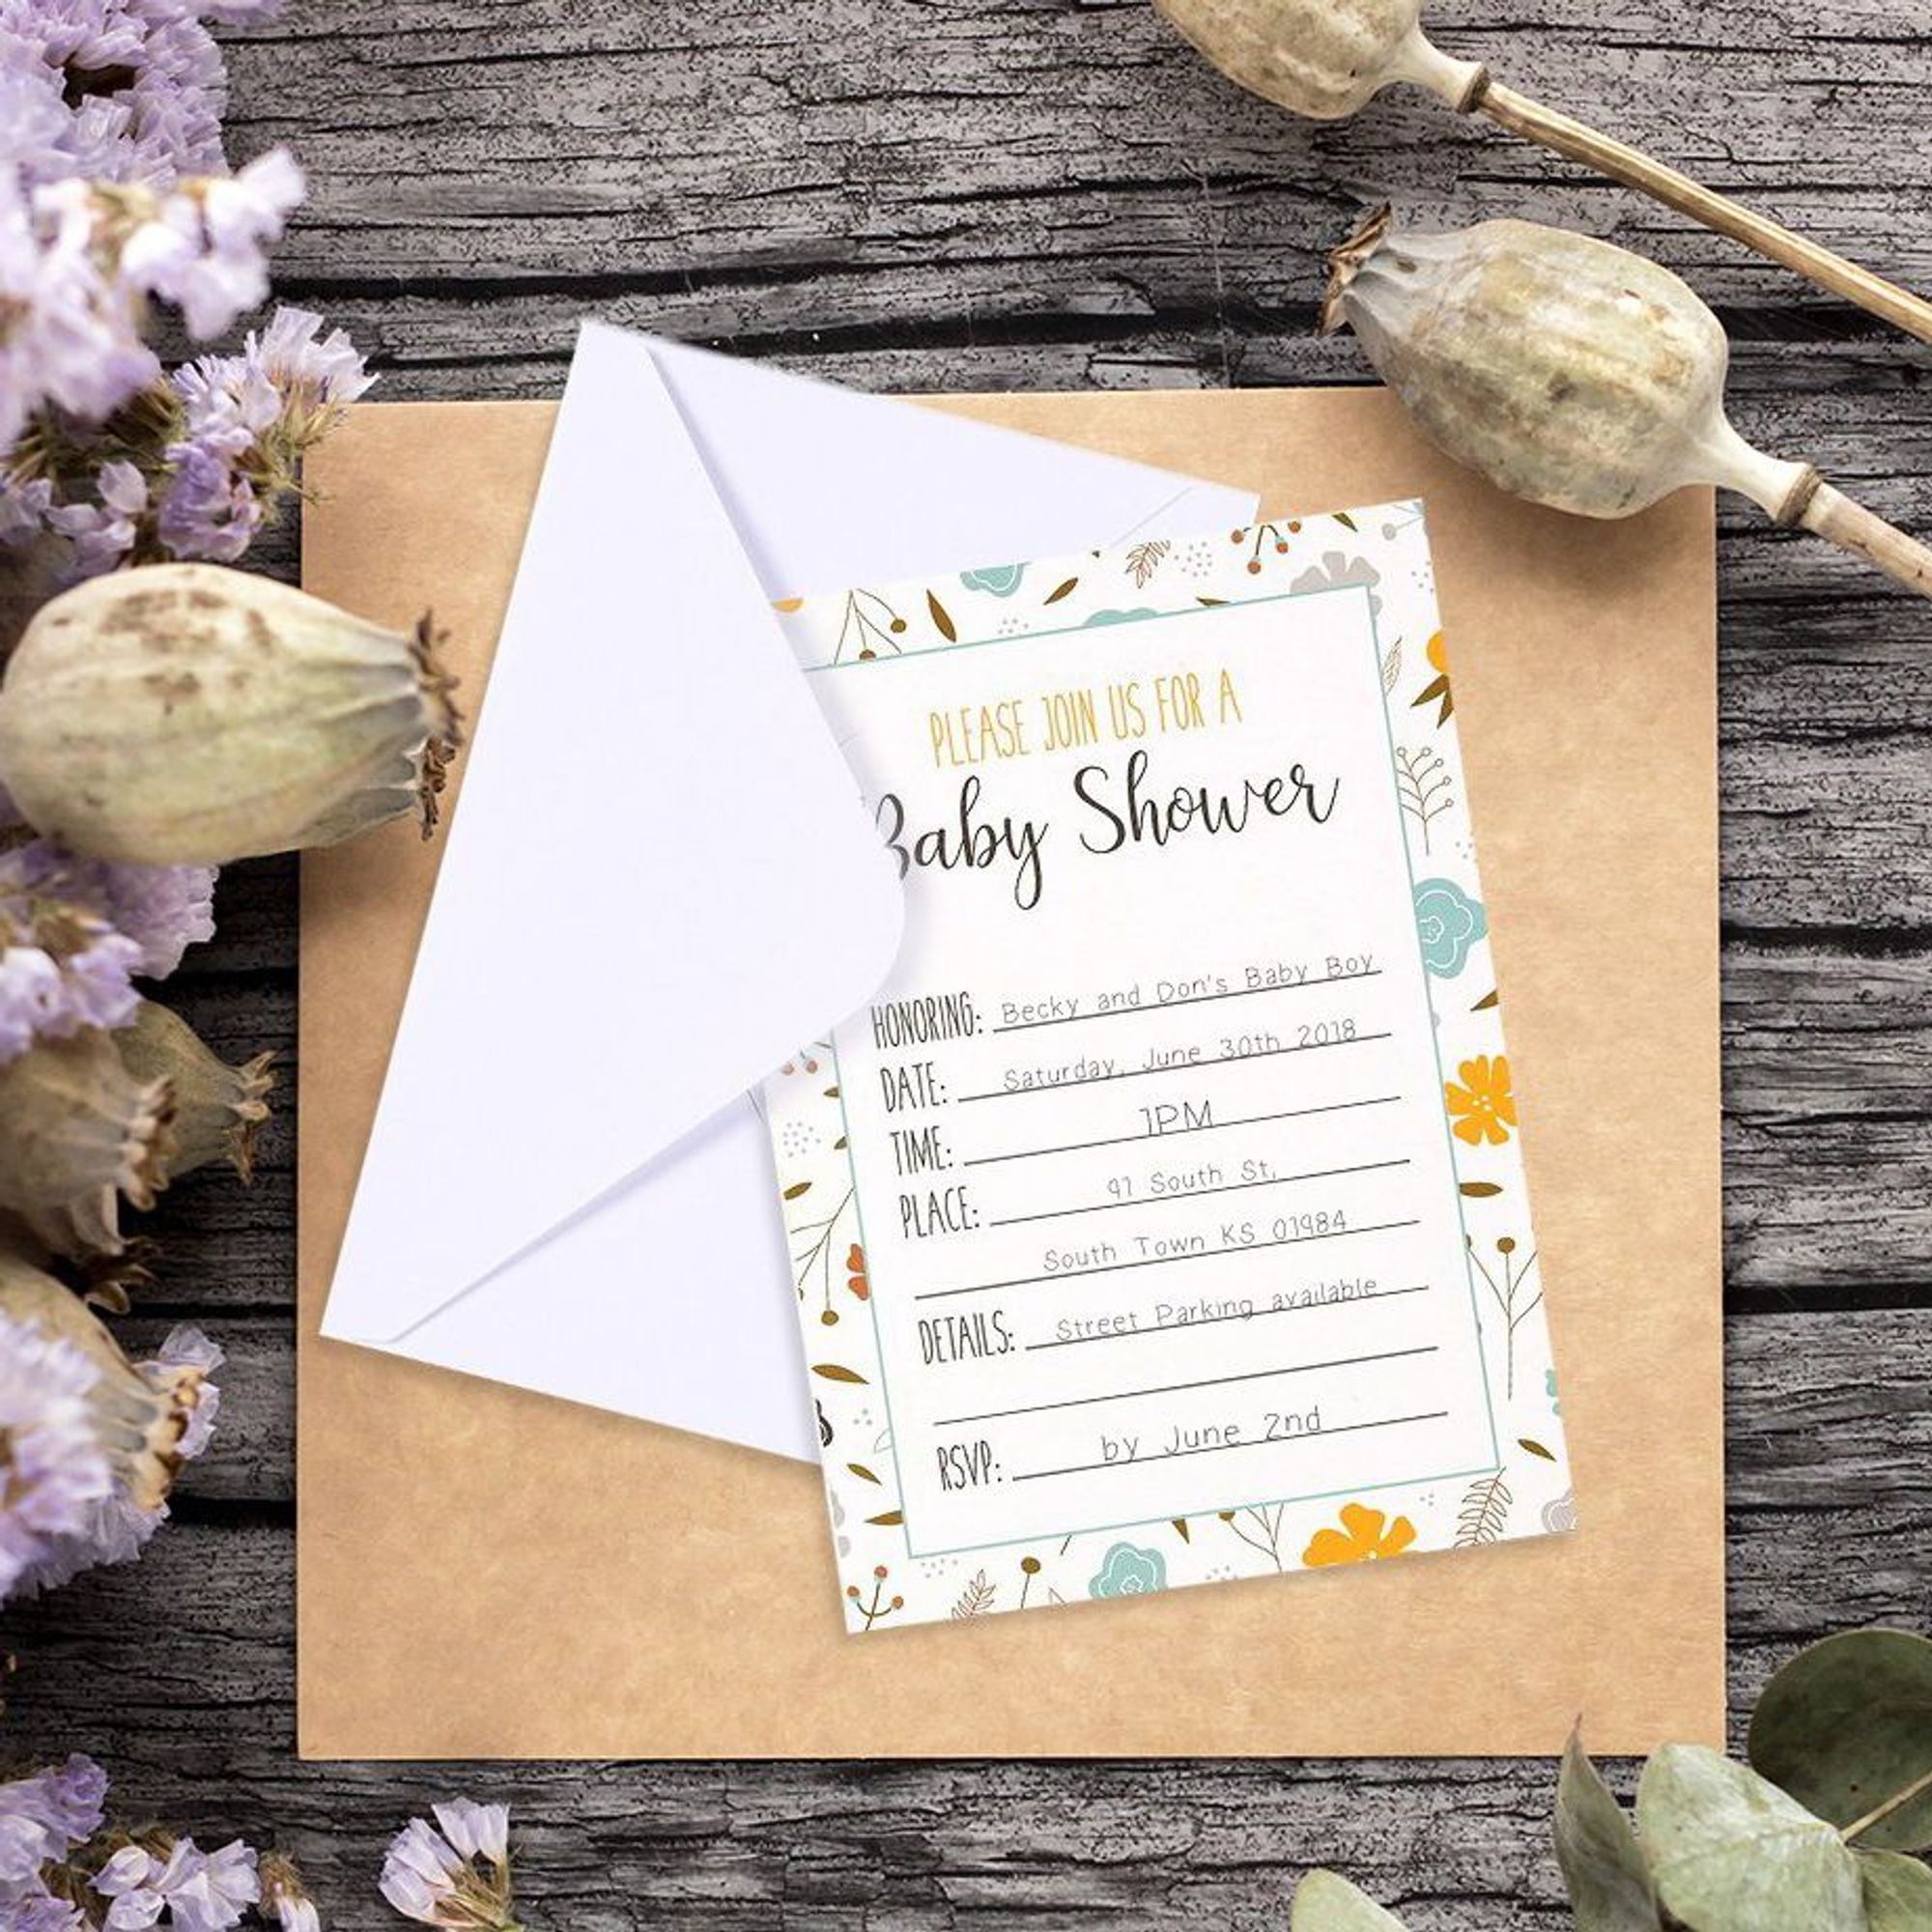 50-Pack Baby Shower Invitations - Adorable Floral Design Invite Cards for your Celebration - Includes 50 White Envelopes - 5 x 7 inches